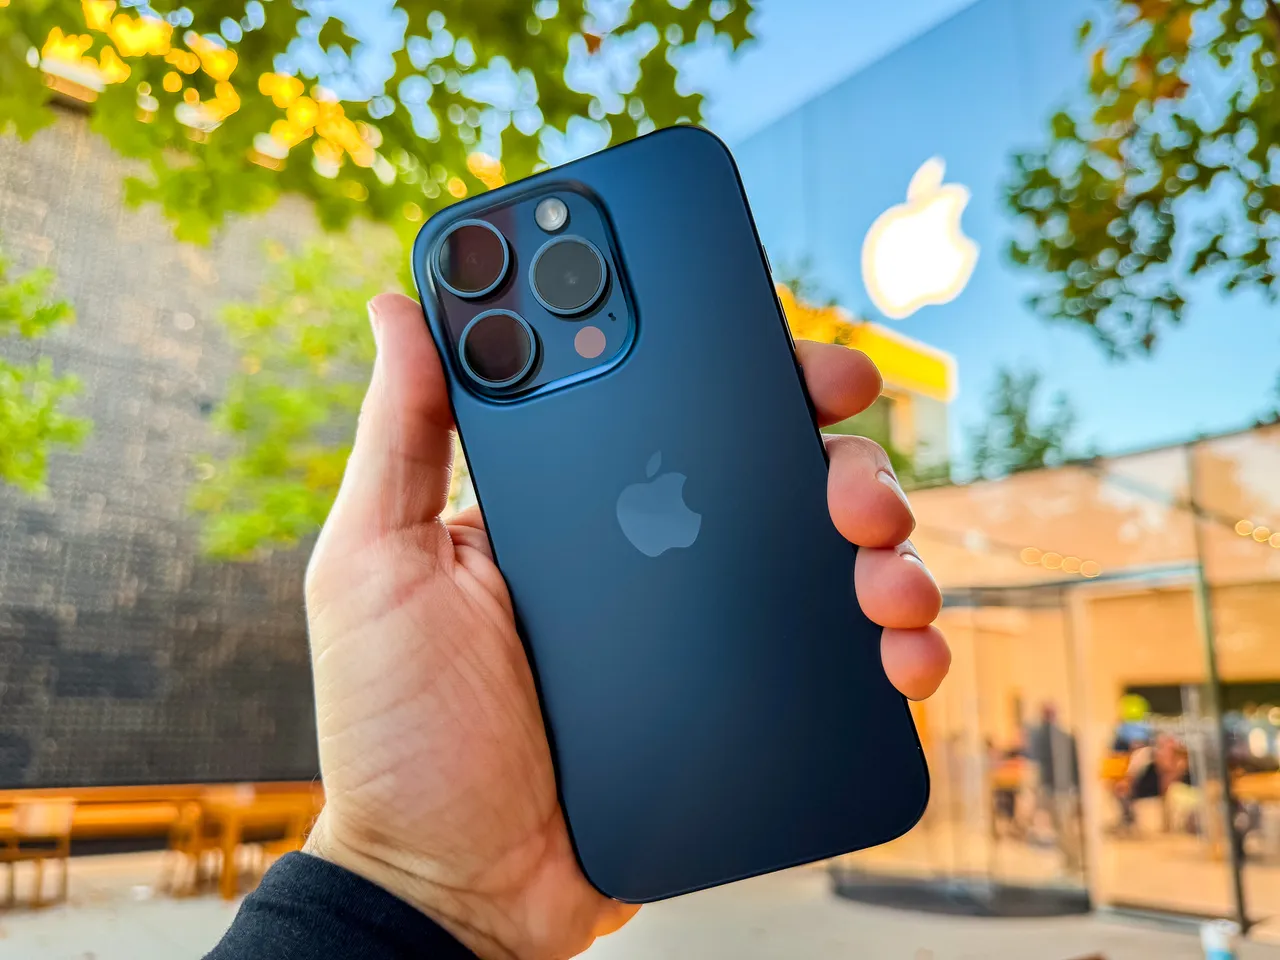 Apple Provides iPhone 15 Pro with a Spatial Video Capture Feature